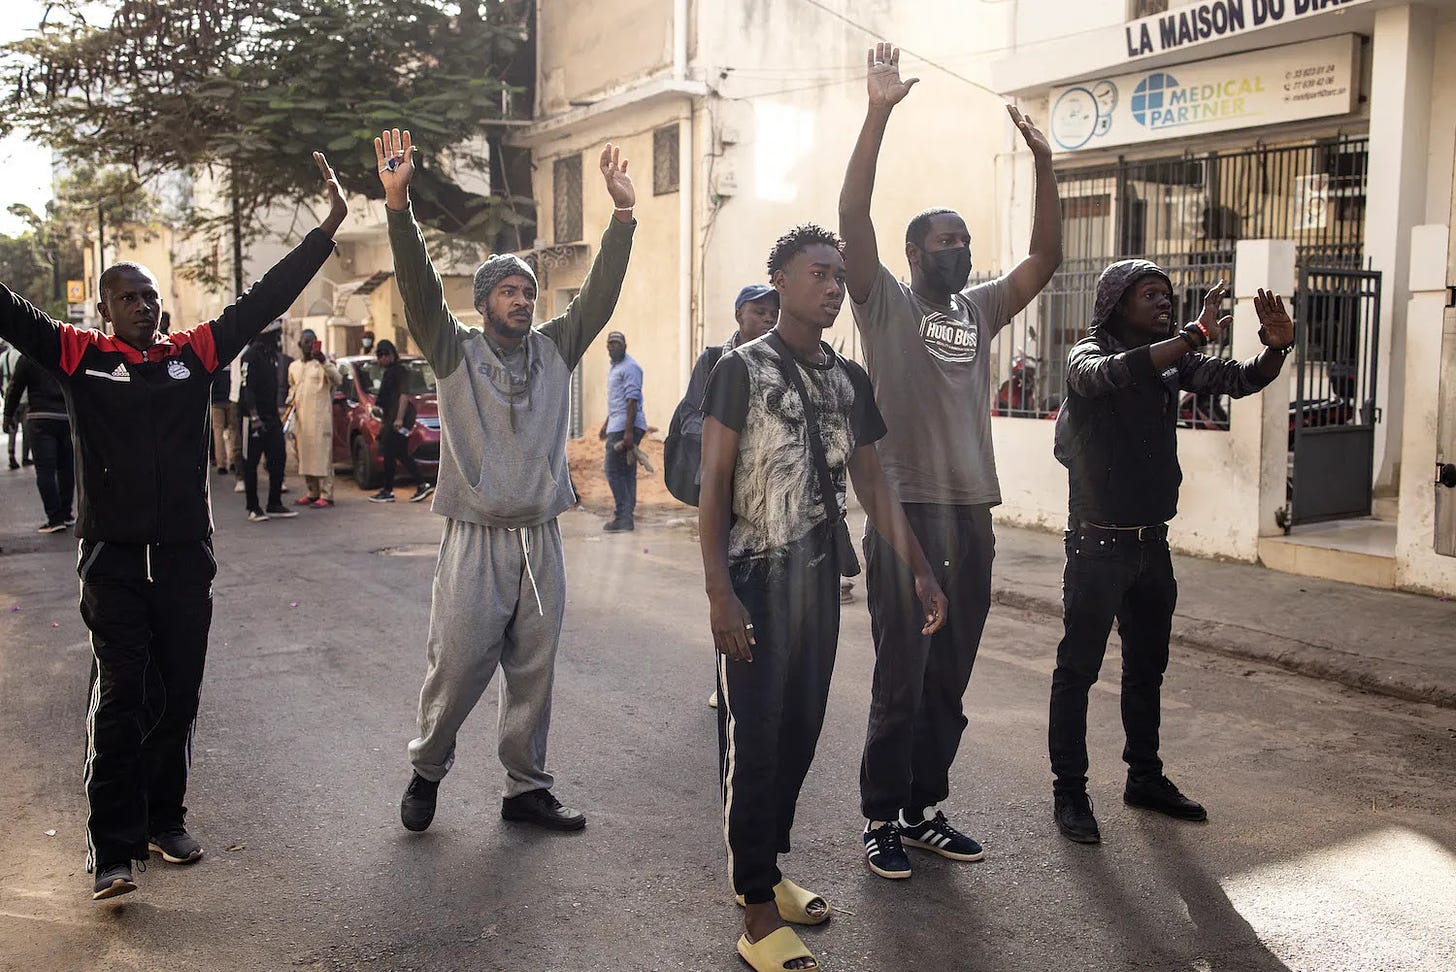 Protesters raise their hands outside the National Assembly in Senegal.